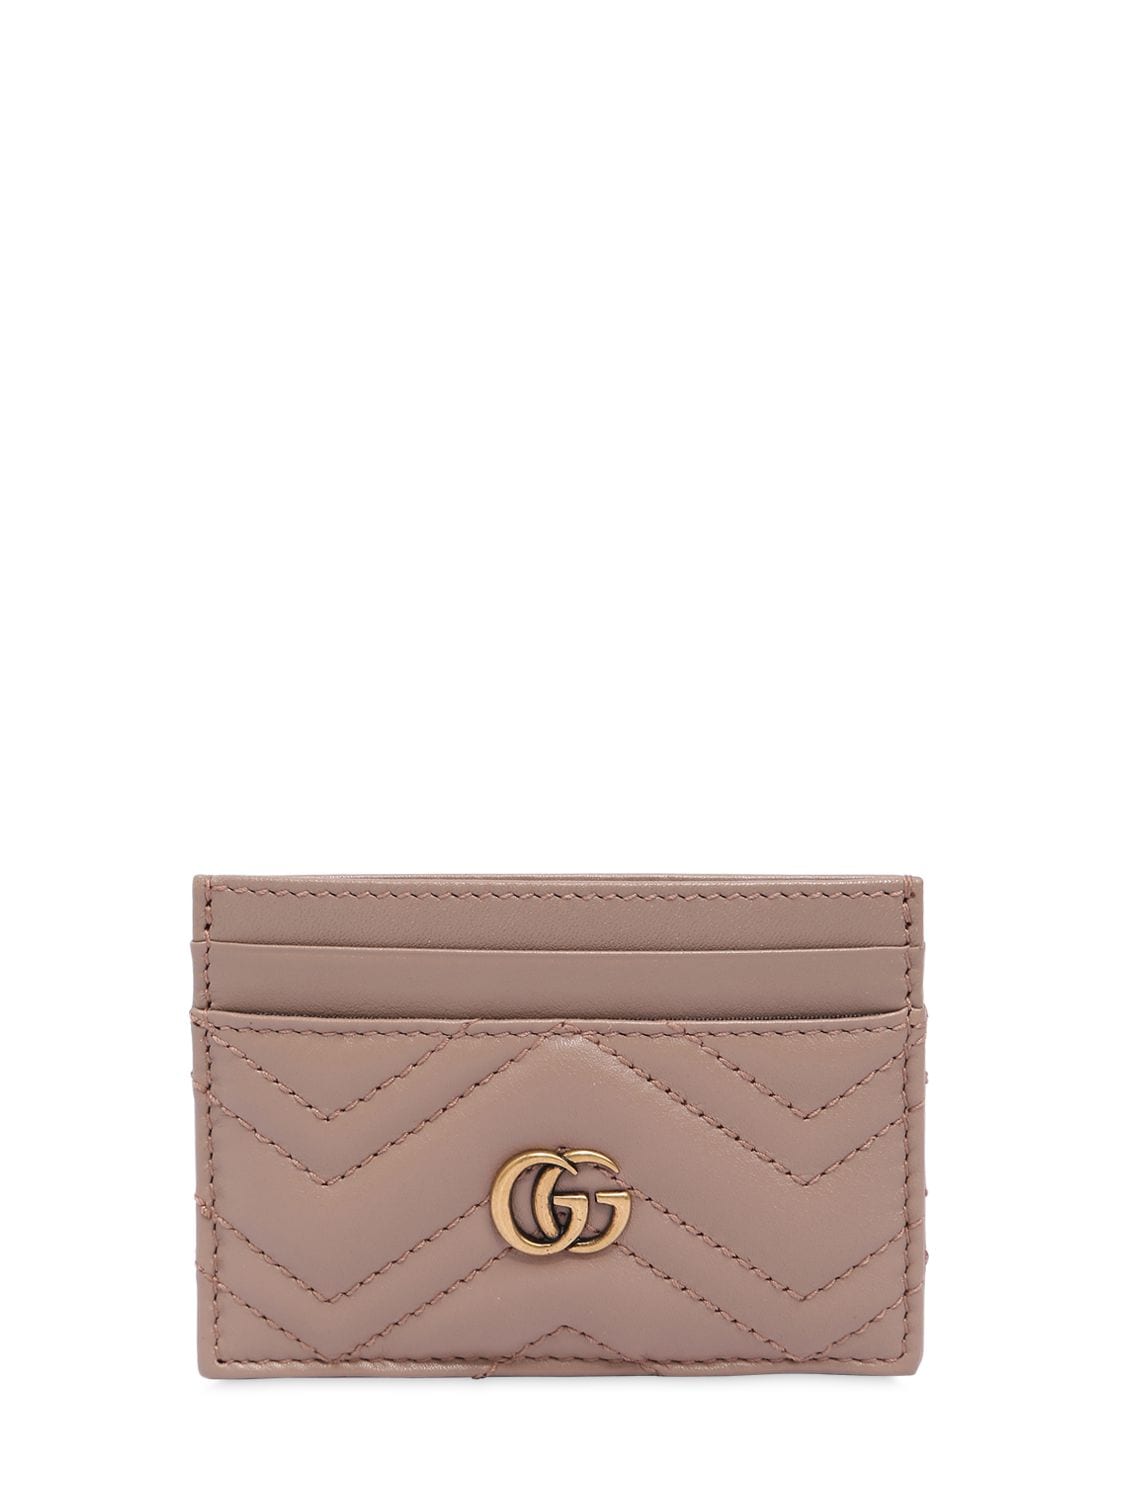 Image of Gg Marmont Quilted Leather Card Holder